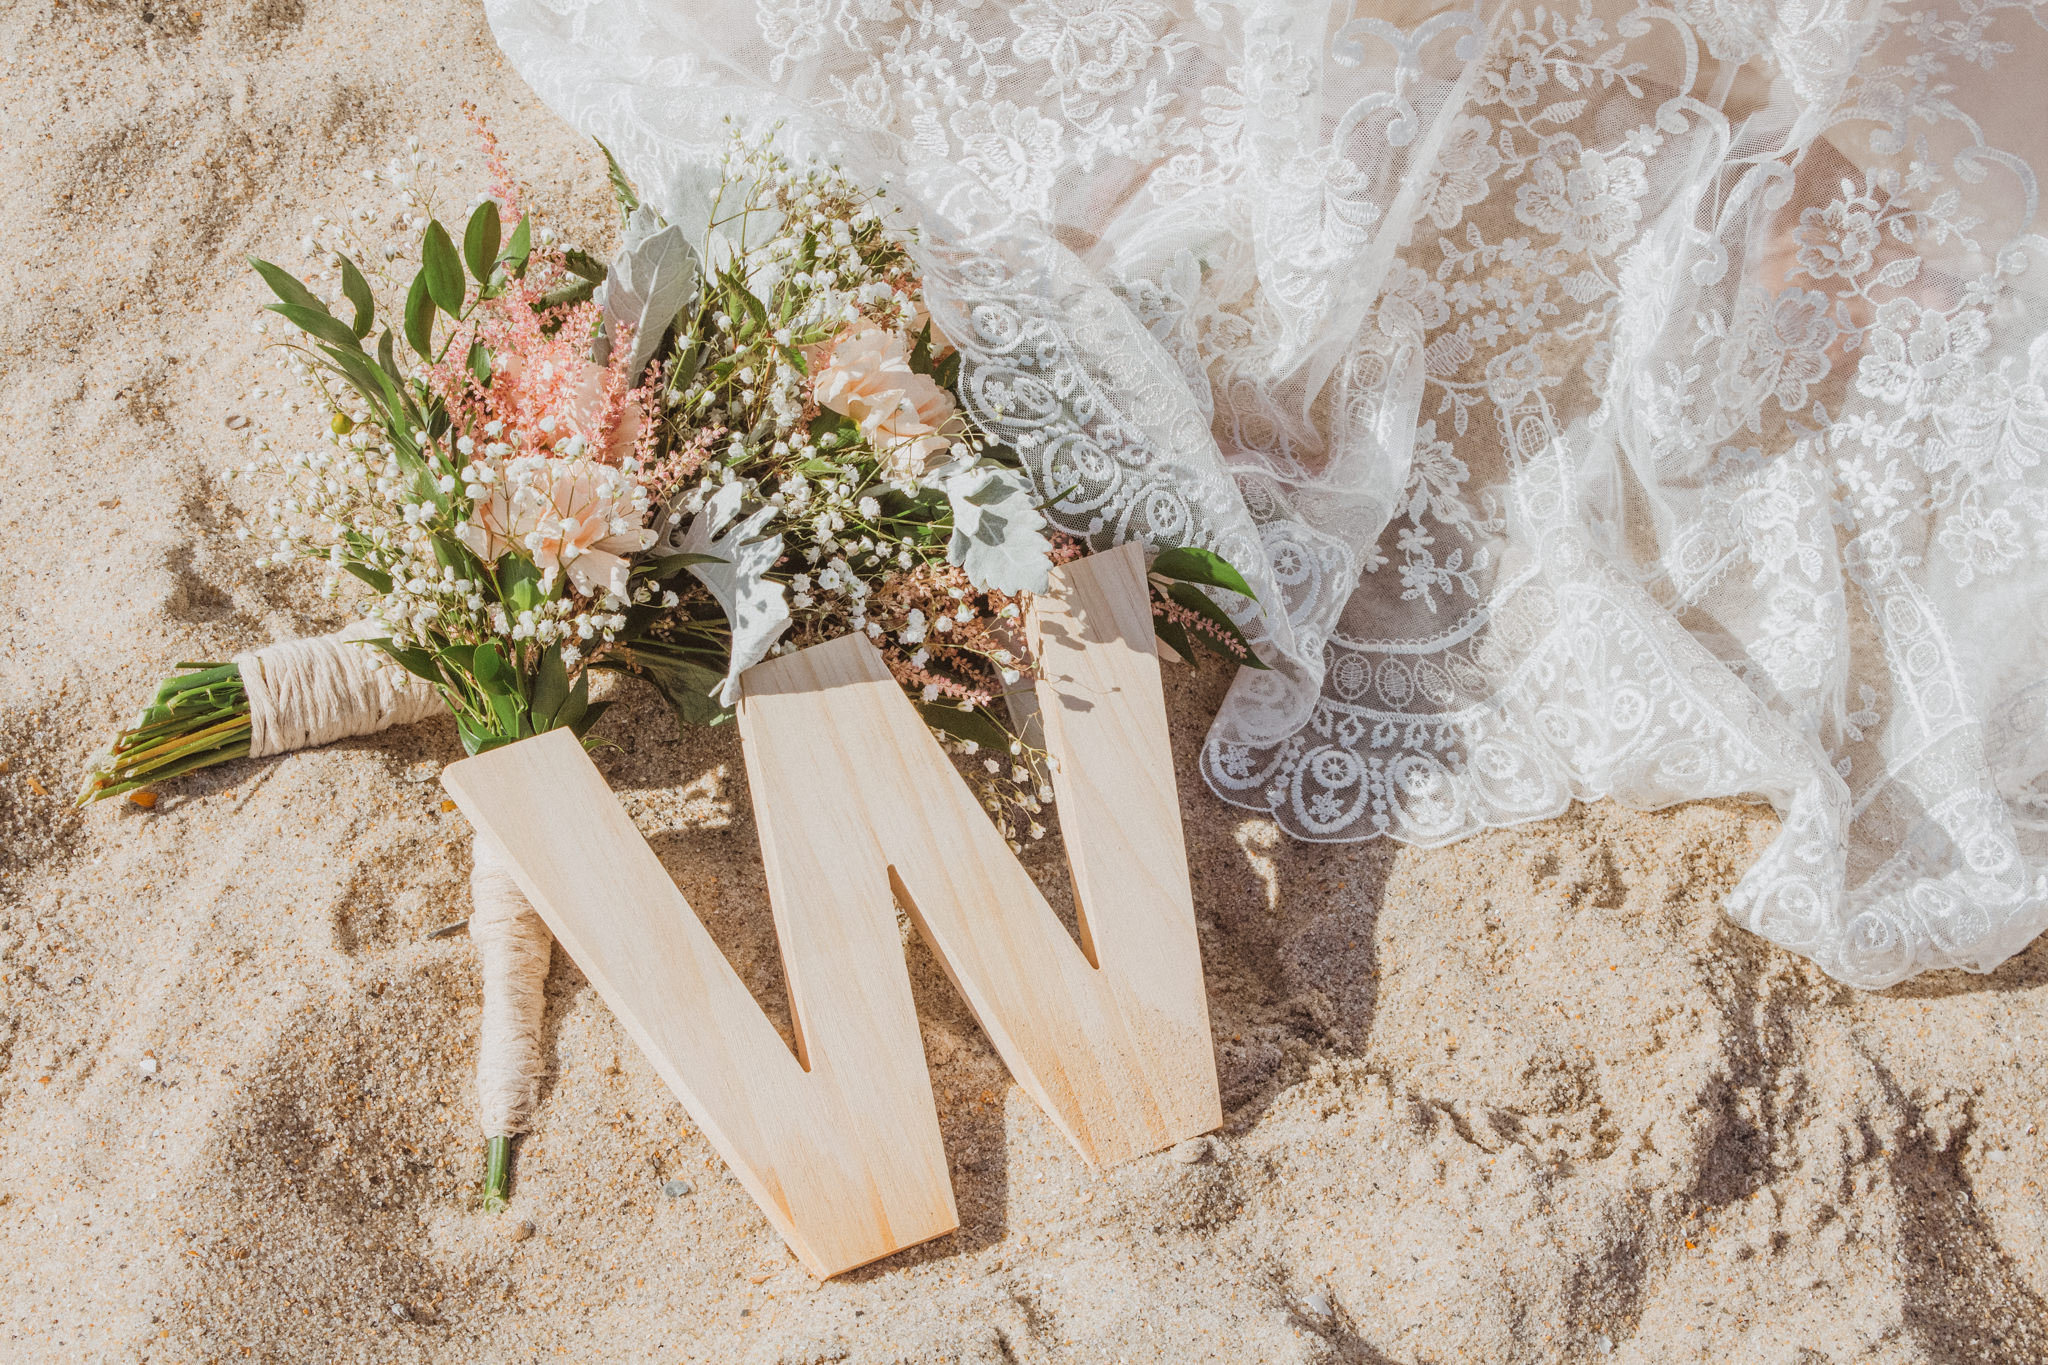 a wooden "w" decoration next to a pink bouquet in the sand